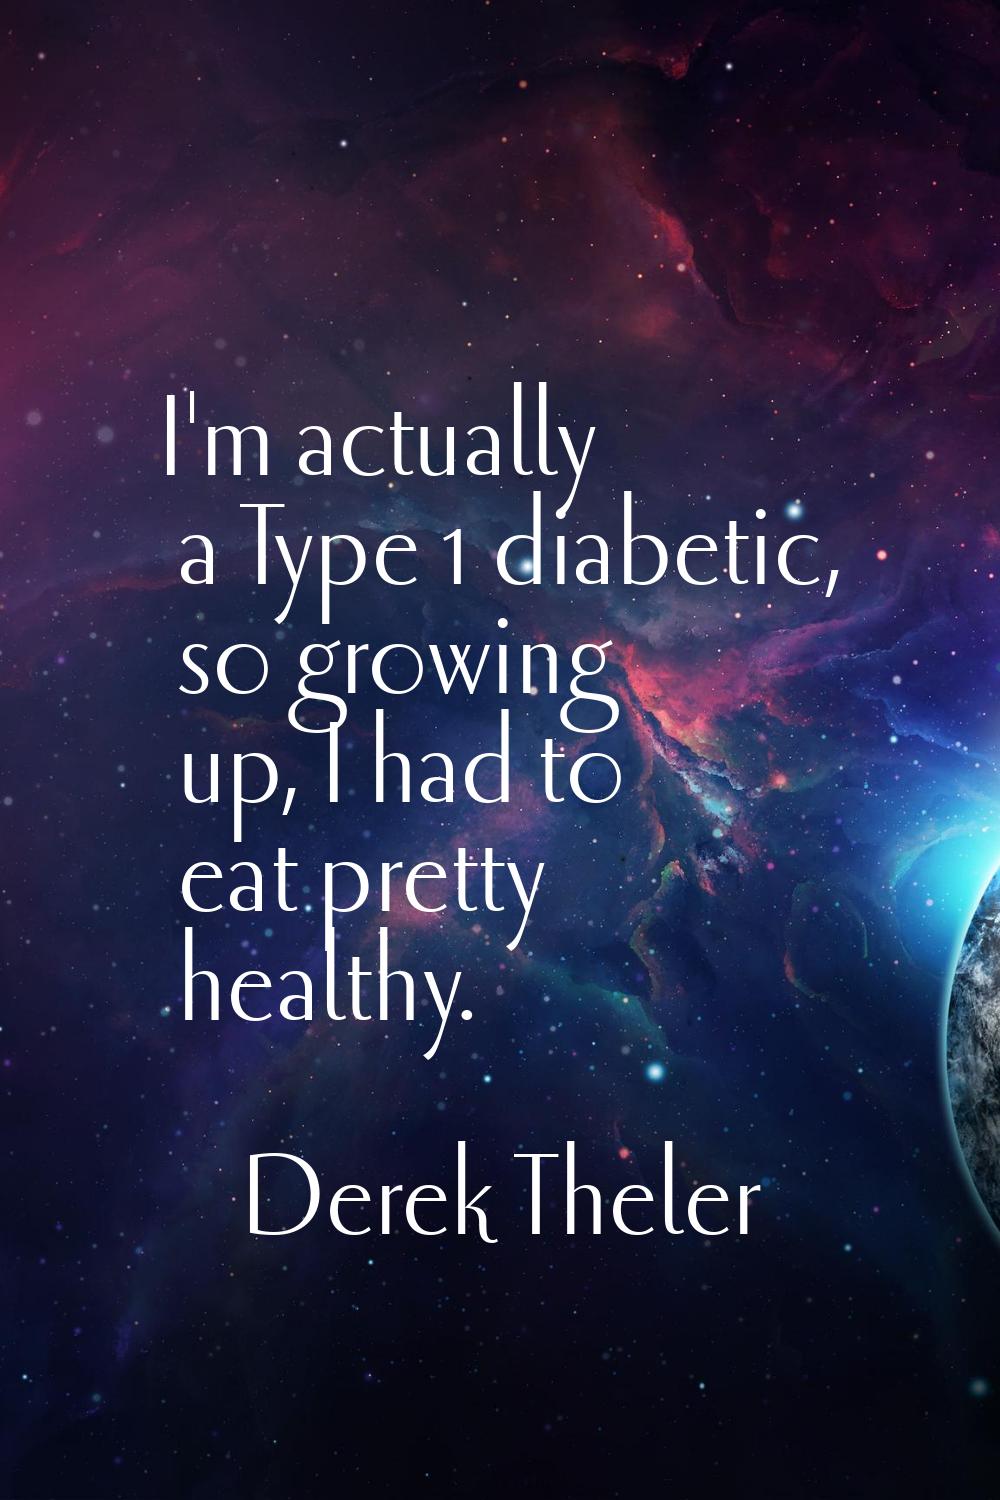 I'm actually a Type 1 diabetic, so growing up, I had to eat pretty healthy.